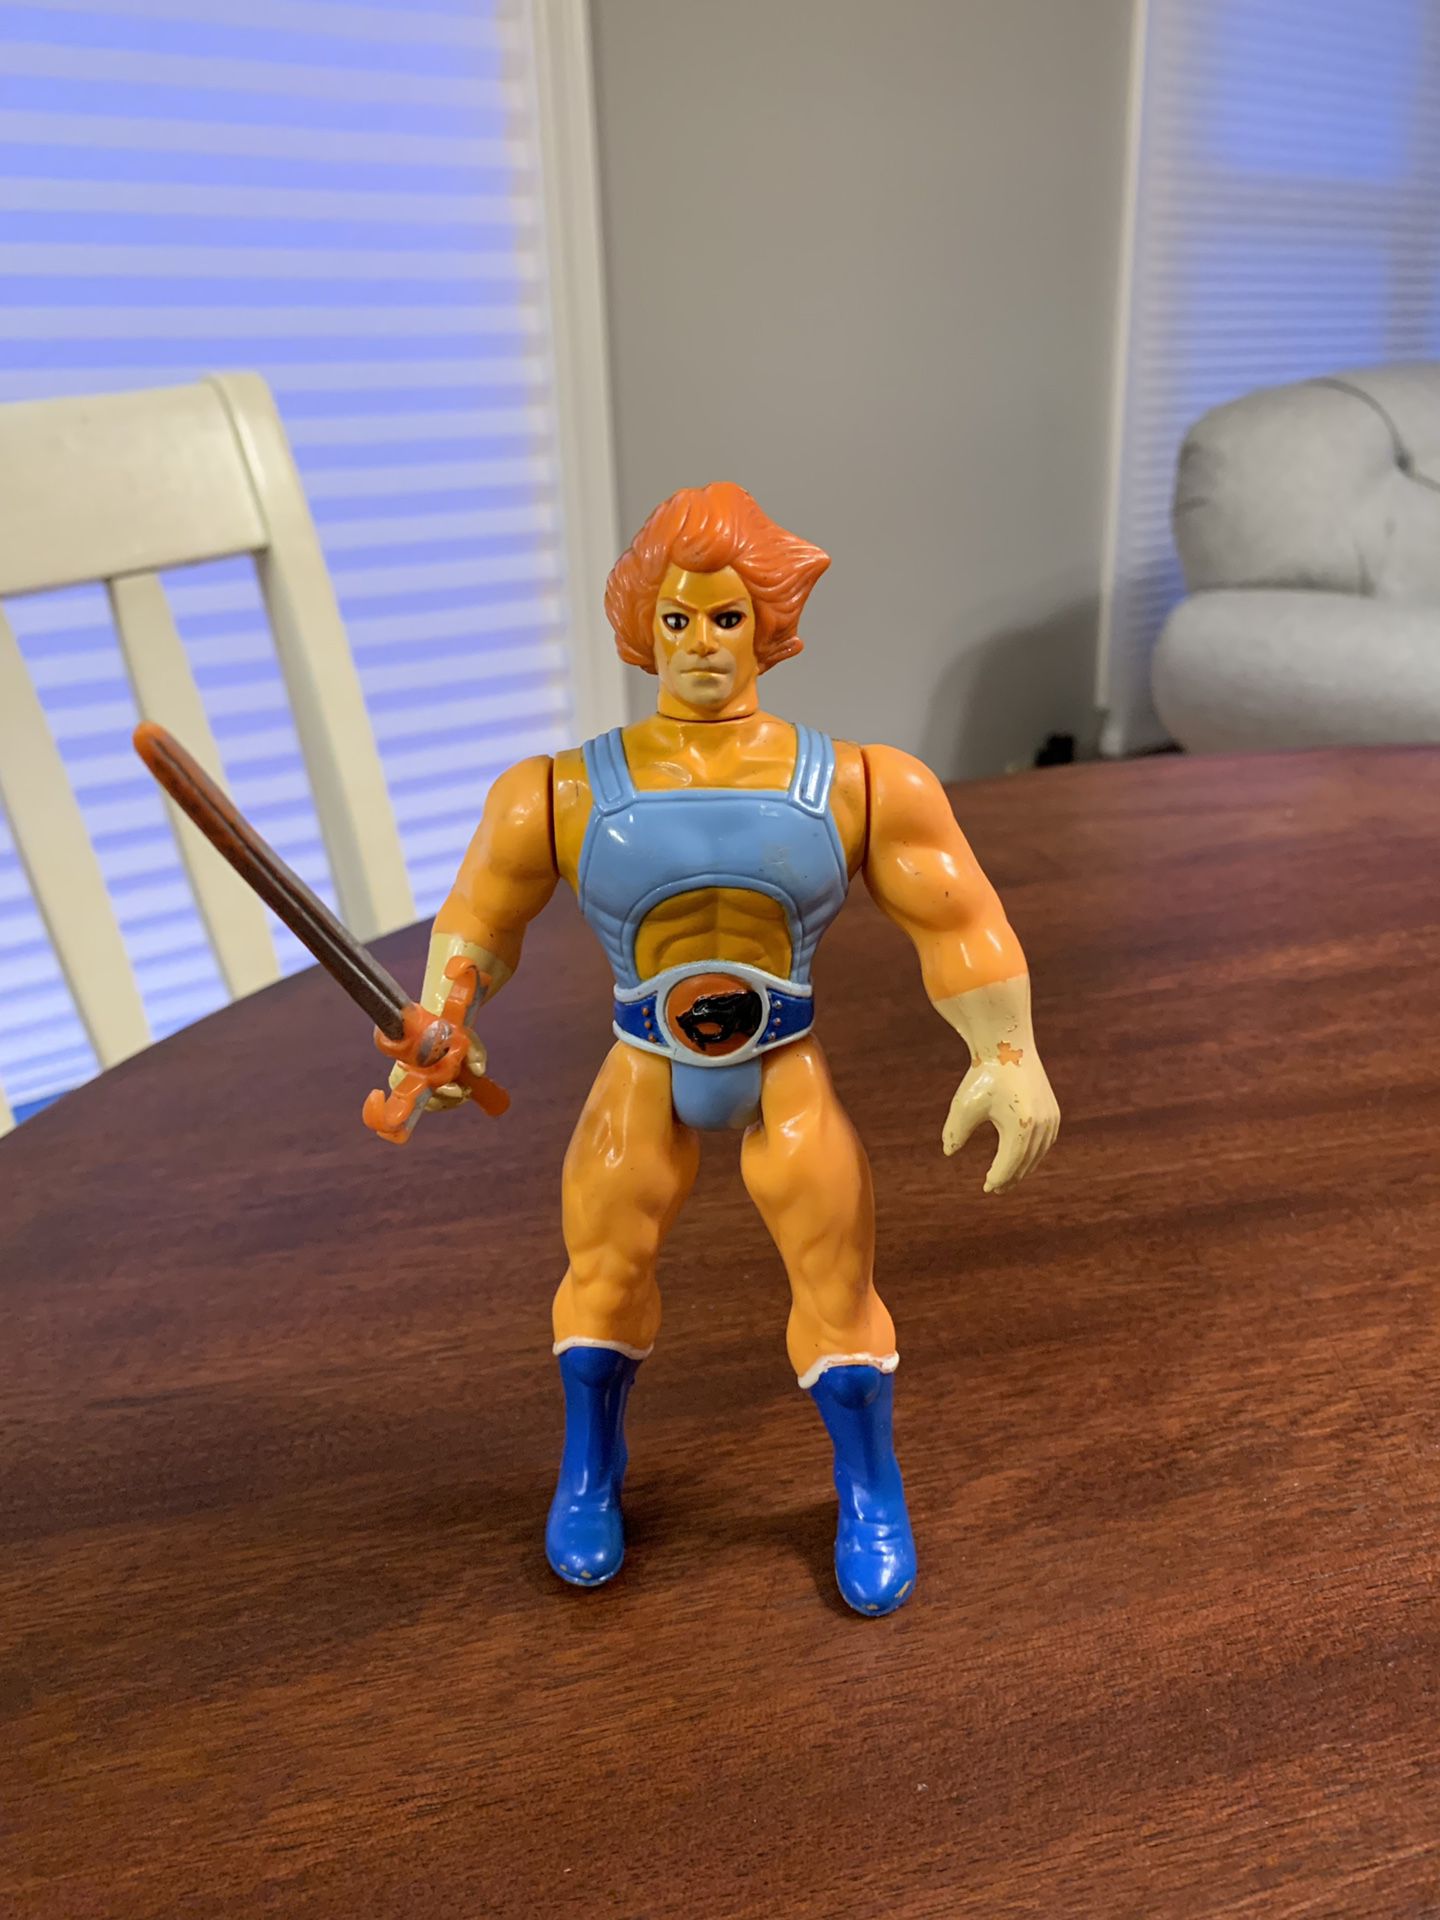 1985 Lion-o thunder cats action figure